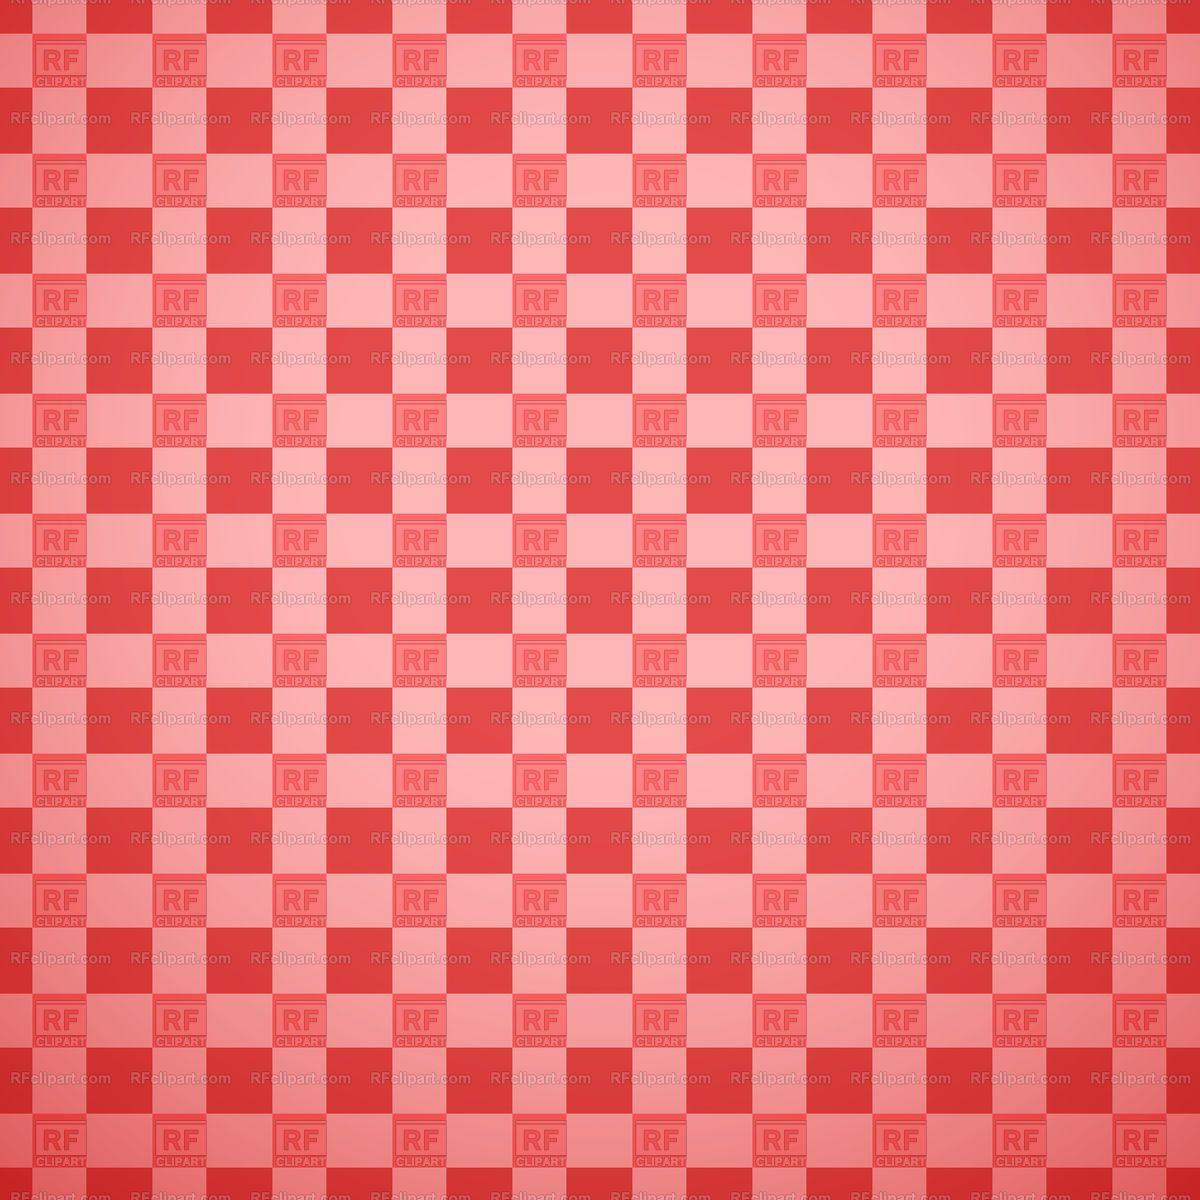 Albums 90+ Wallpaper Red And White Checkered Wallpaper Border Stunning ...